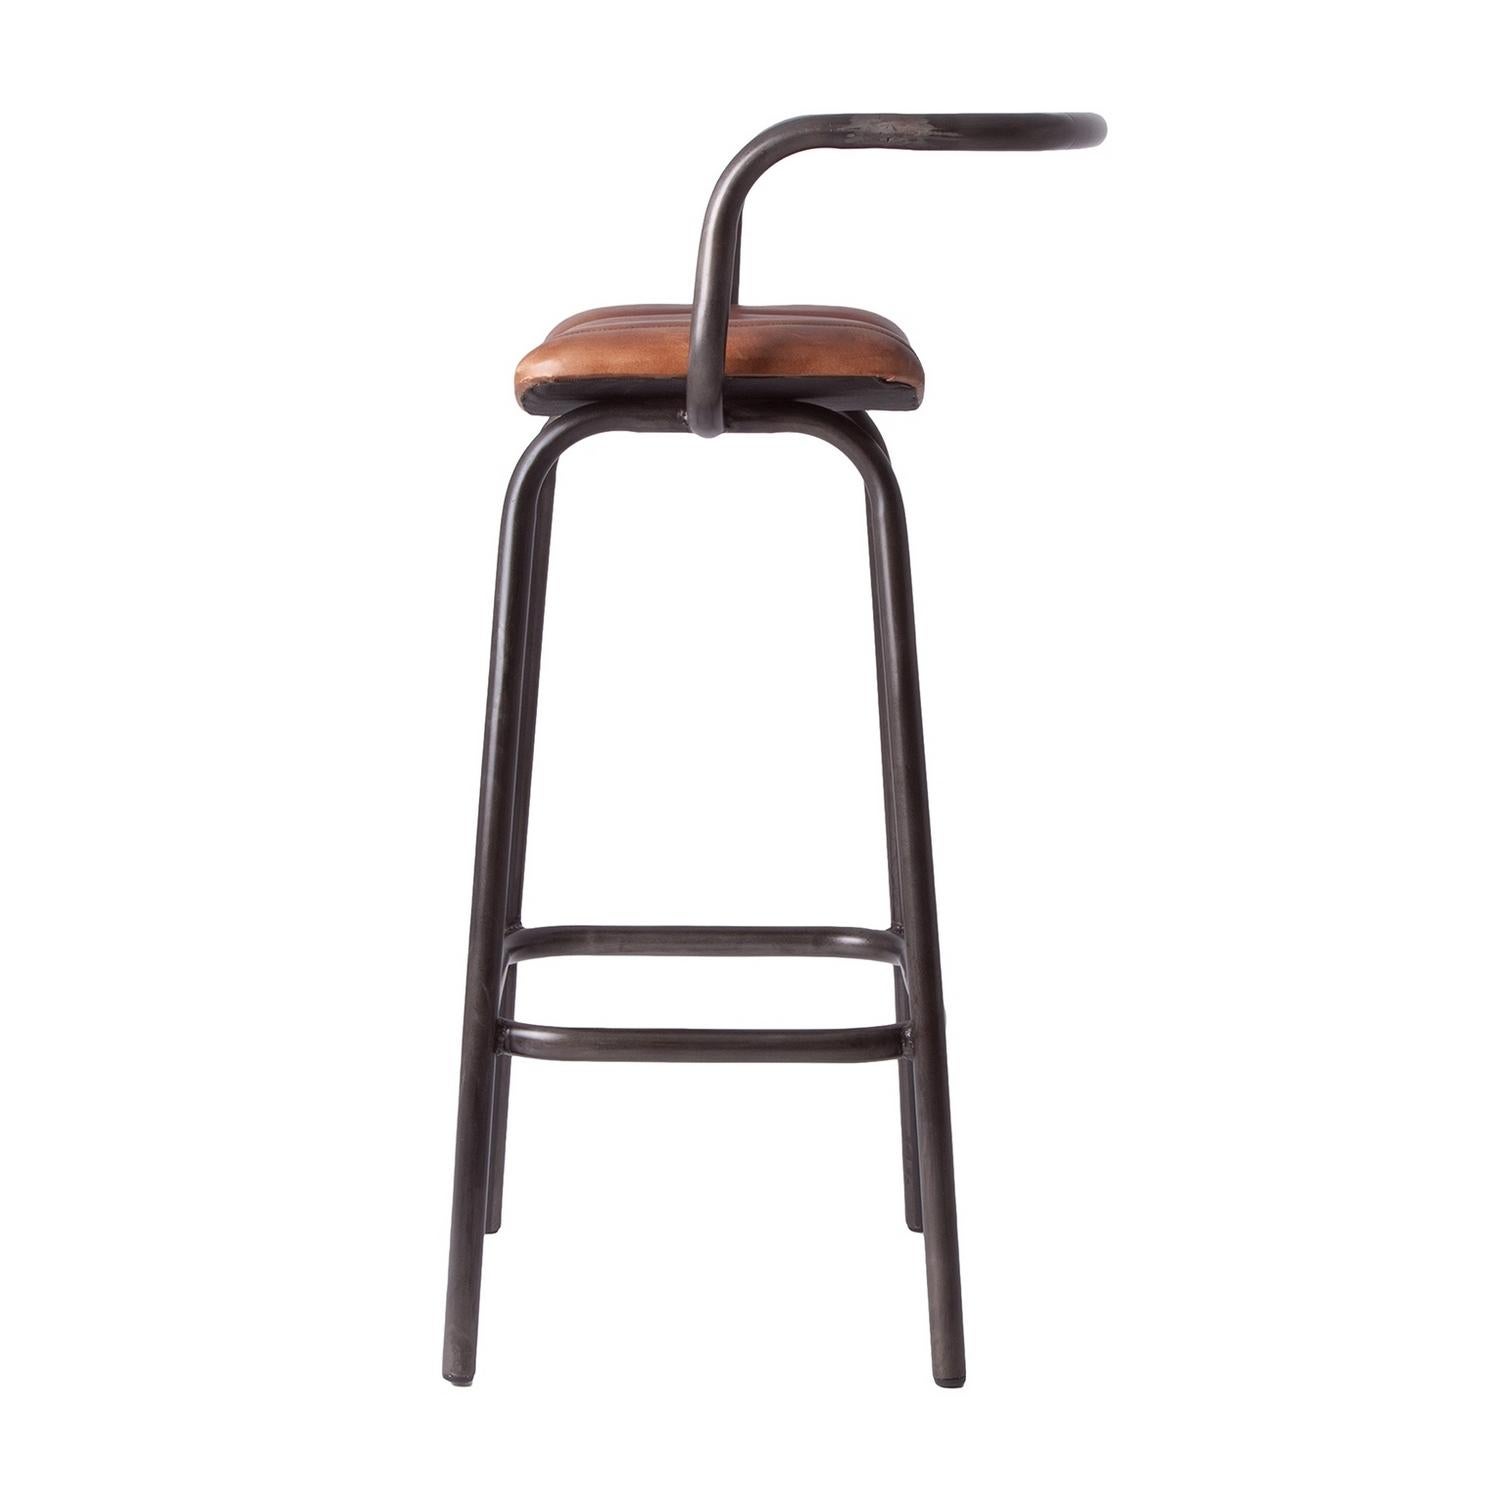 Elegant bar stool with metal structure and leather seat, combining quality, robustness and class. Comfortable and ergonomic, aerial and design. In excellent condition (new items, never used).